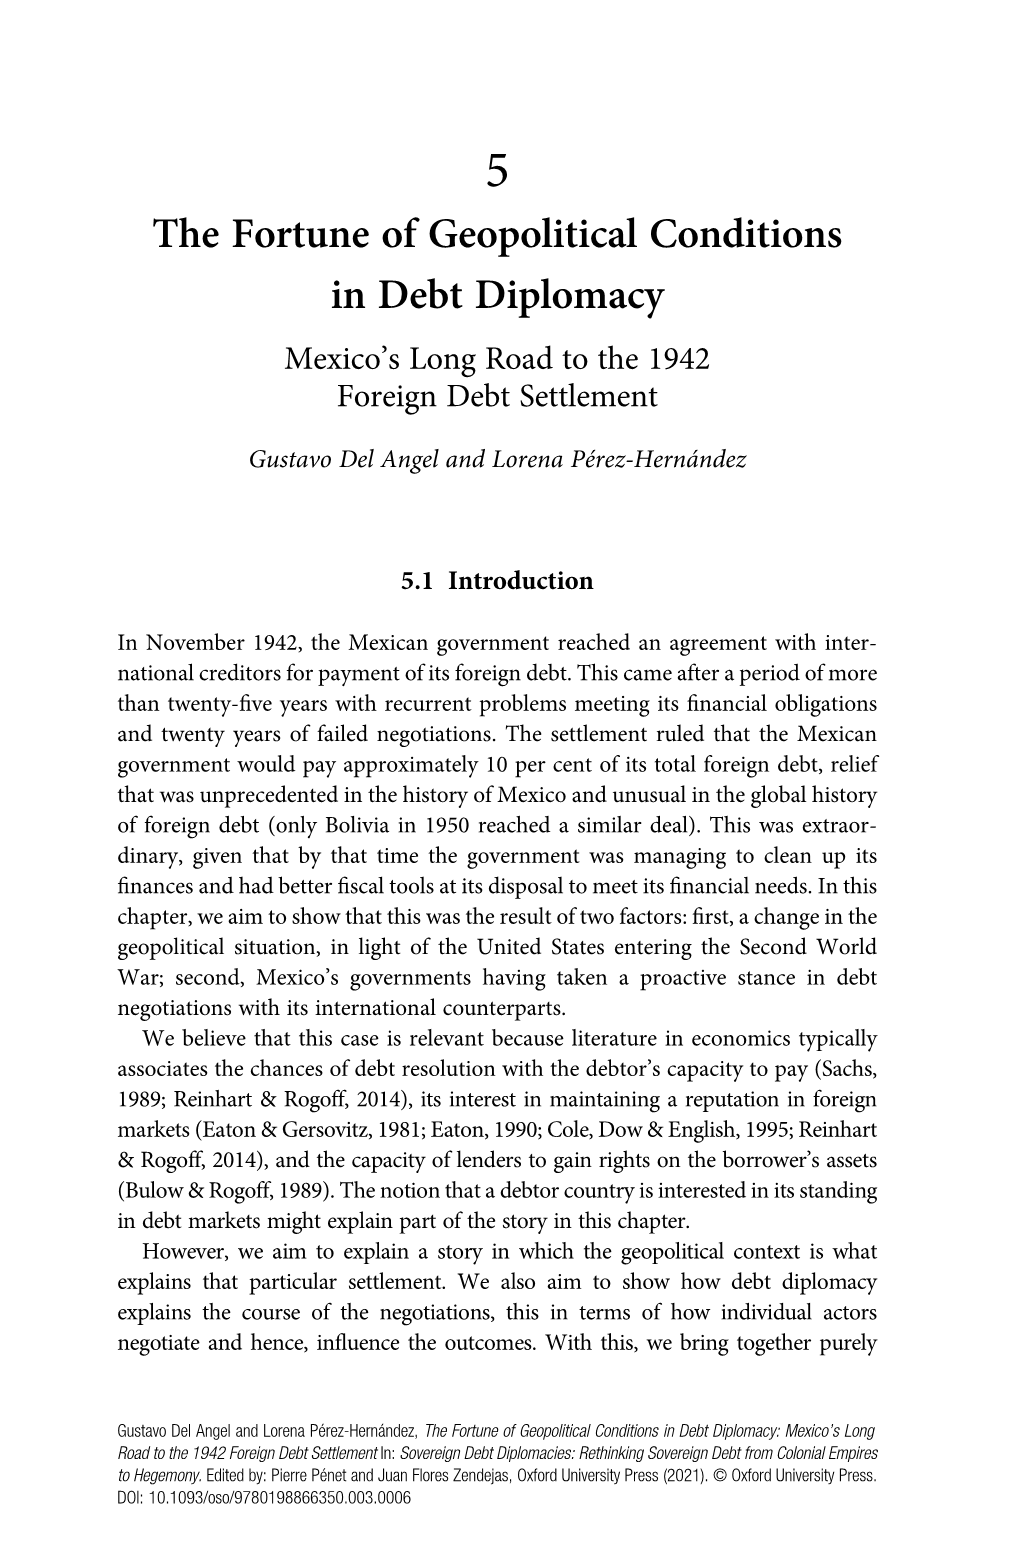 The Fortune of Geopolitical Conditions in Debt Diplomacy Mexico’S Long Road to the 1942 Foreign Debt Settlement